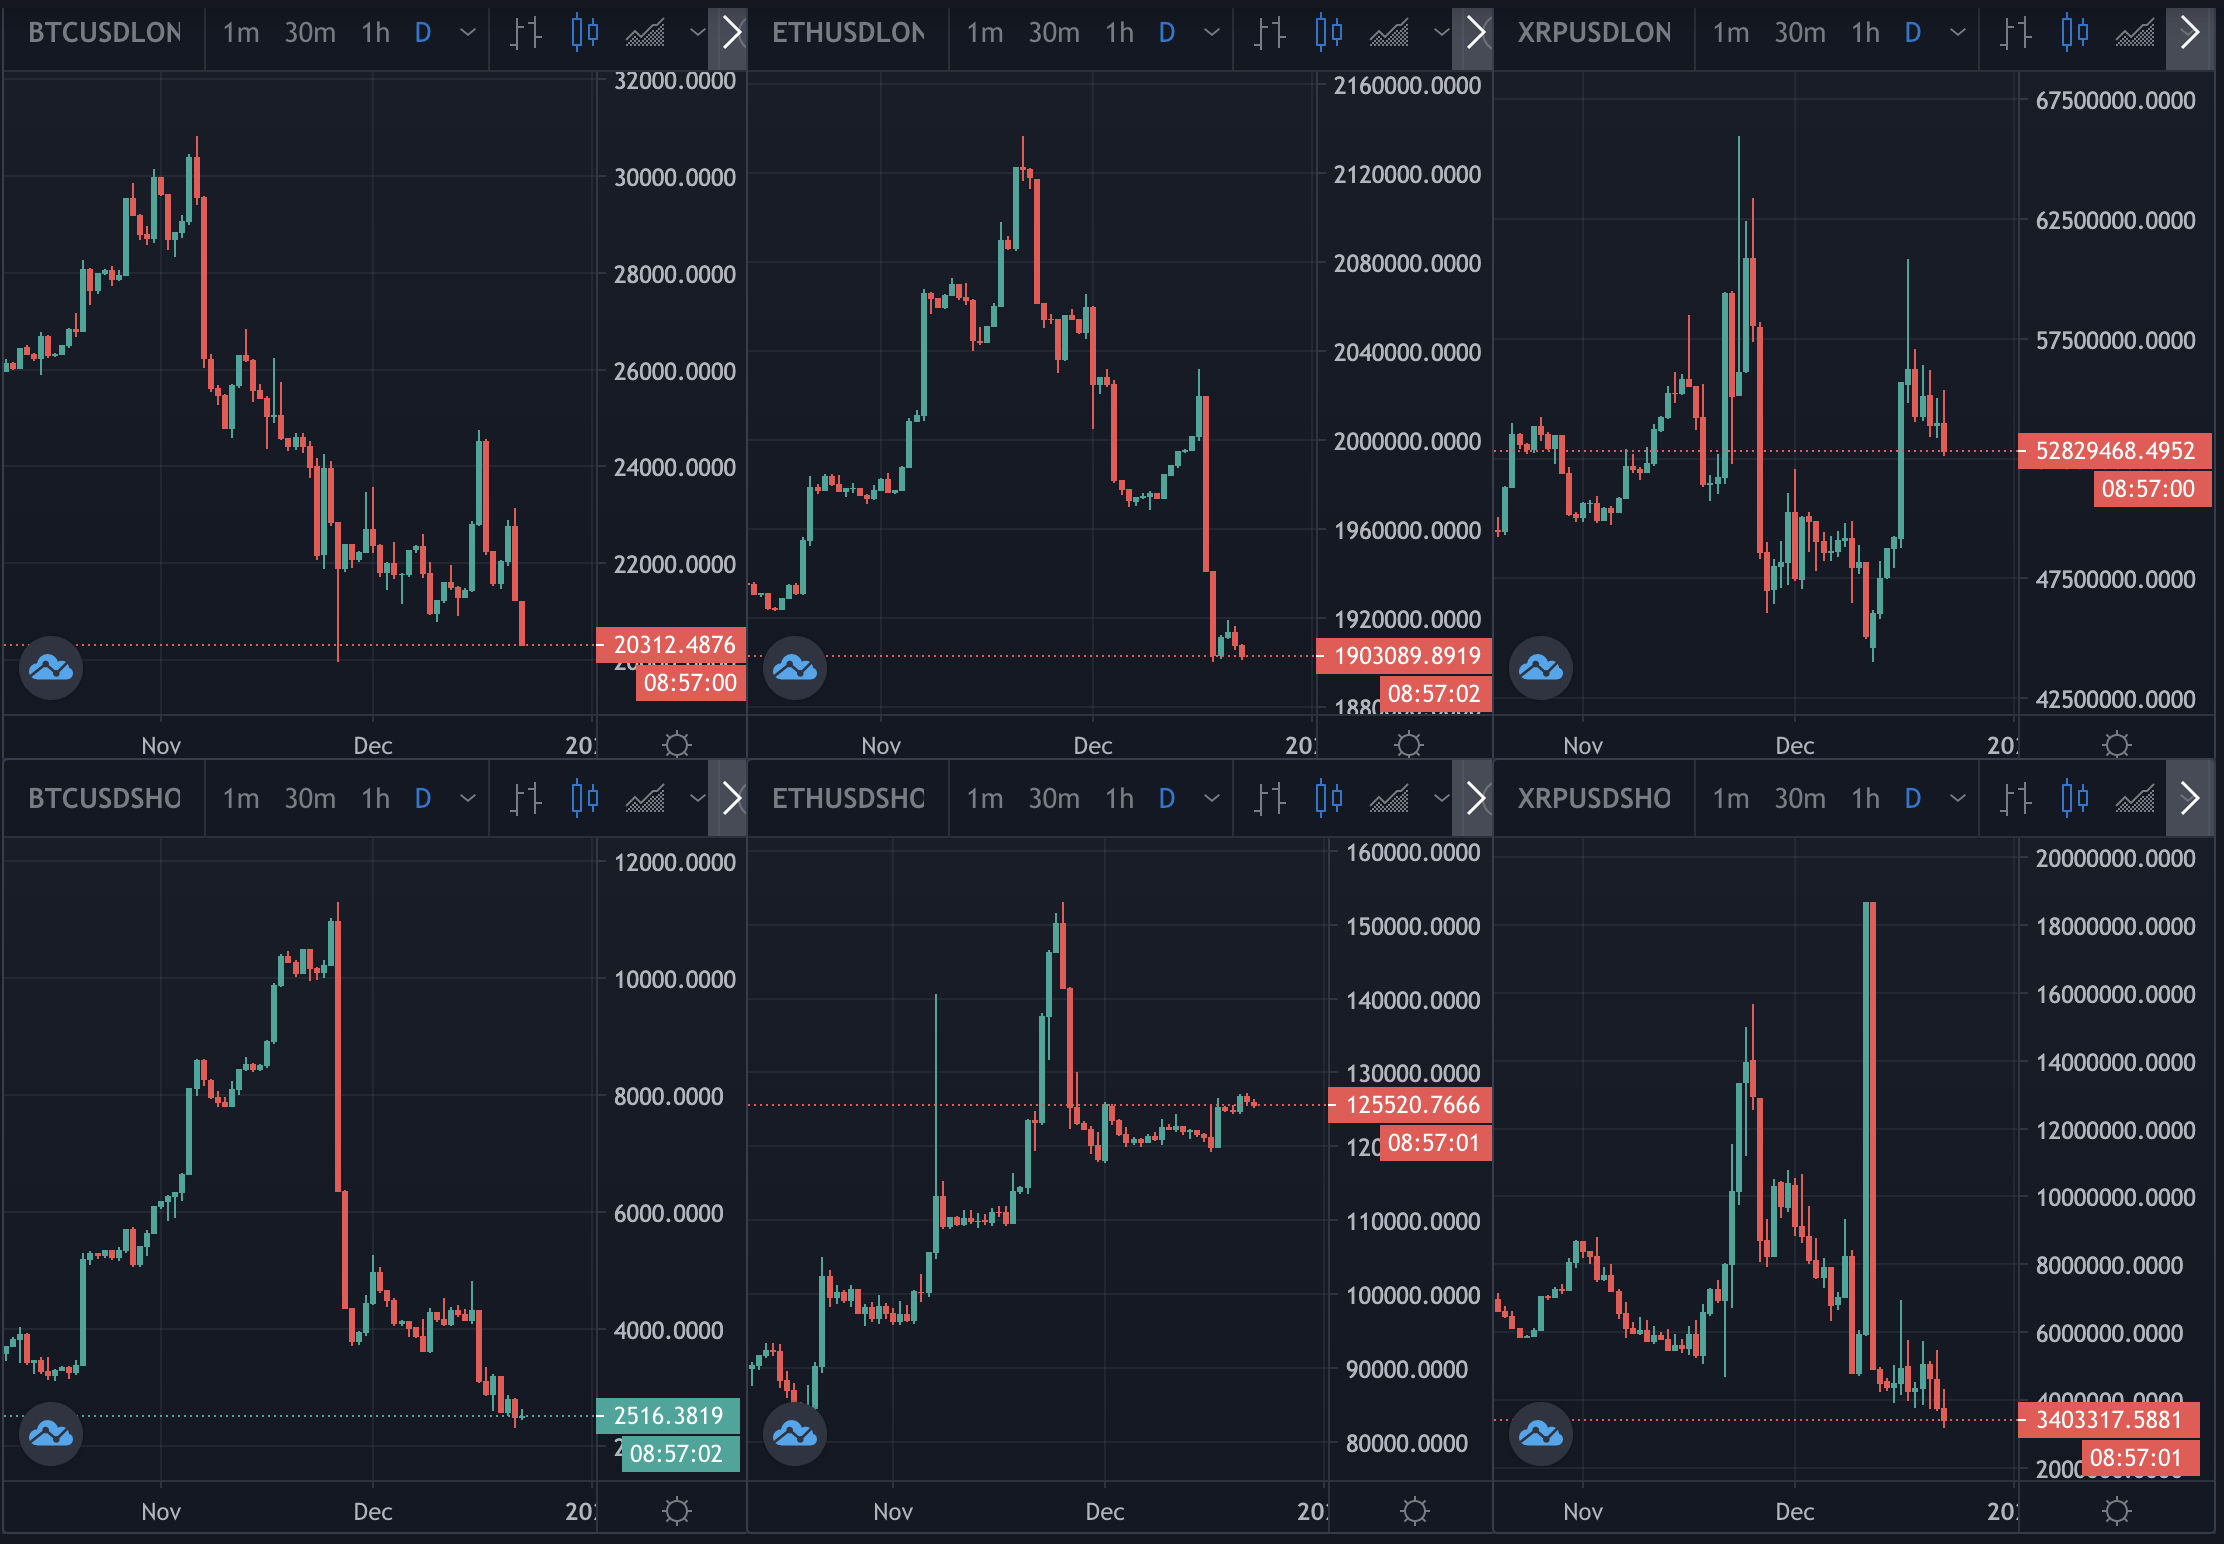 Bitcoin and eth longs and shorts, Dec 2020